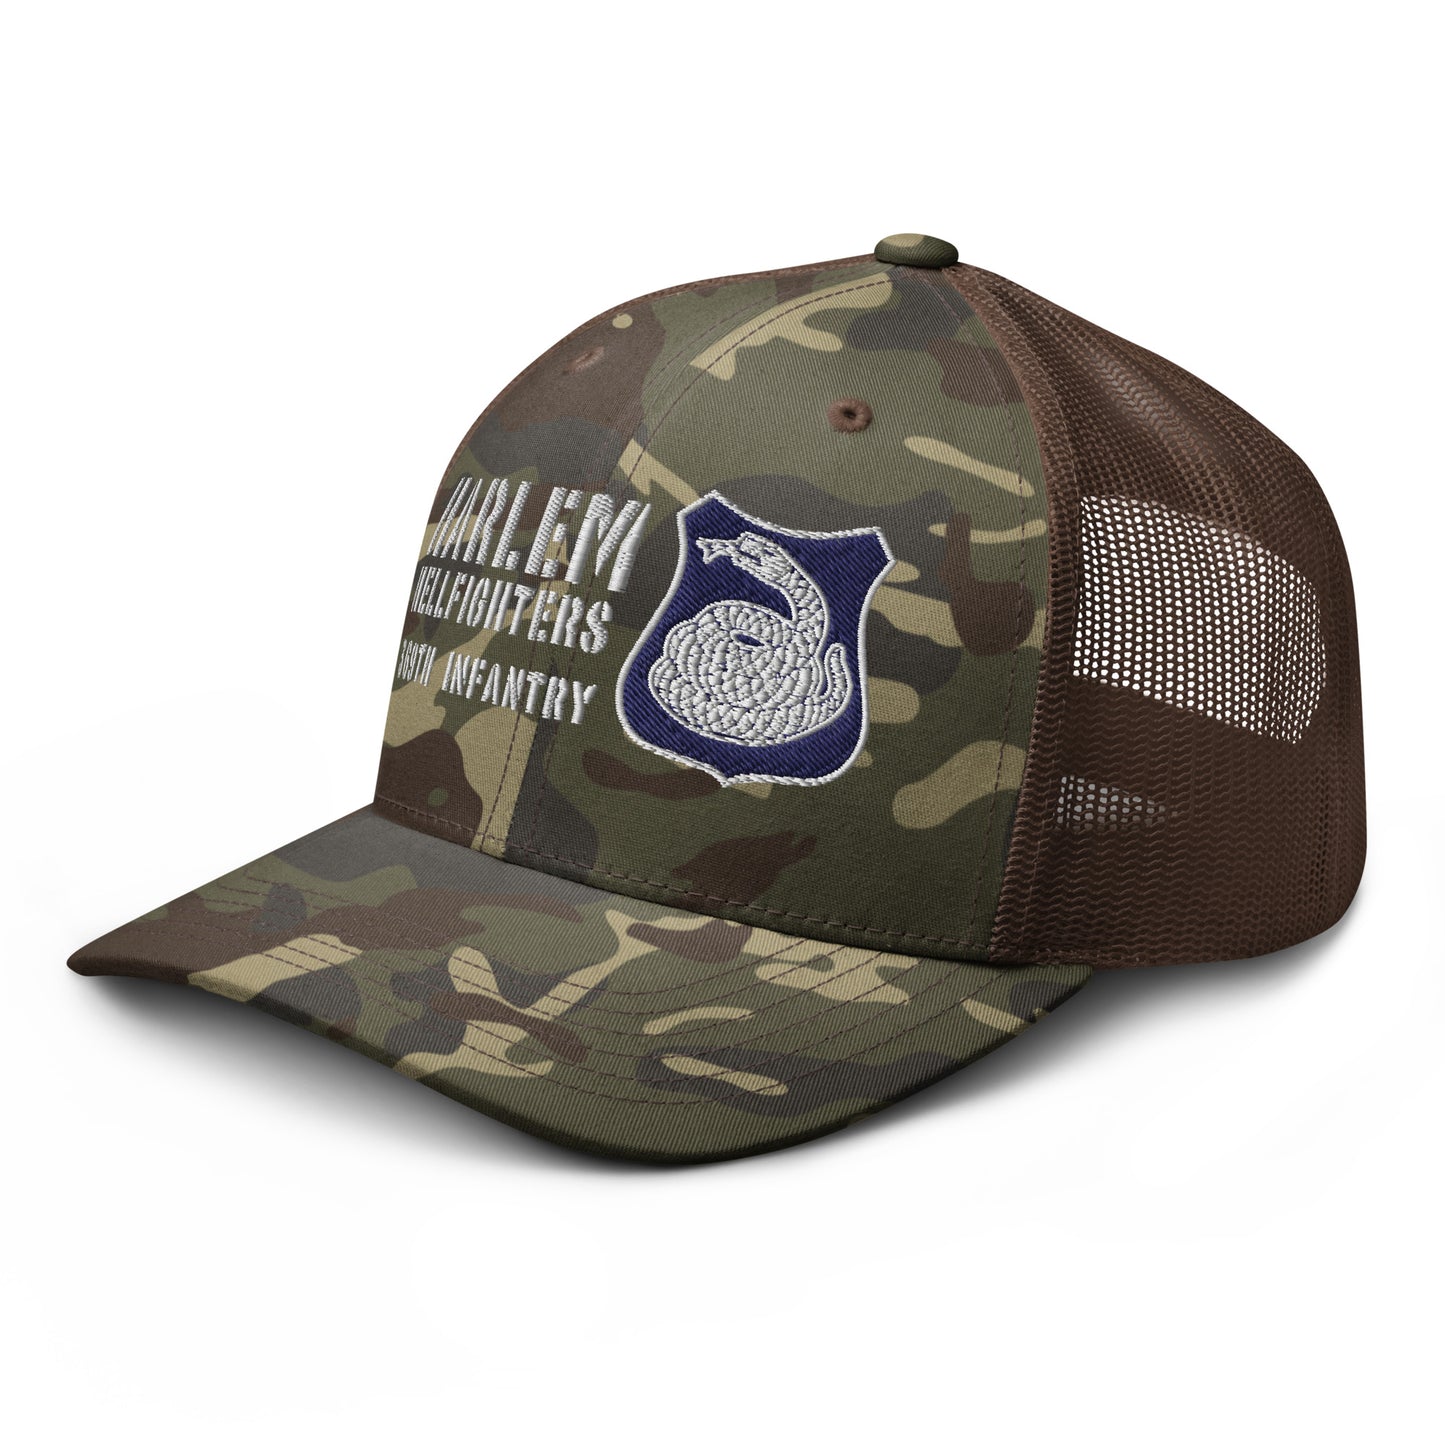 light color camo trucker hat with rattlesnake crest and text reading harlem hellfighters